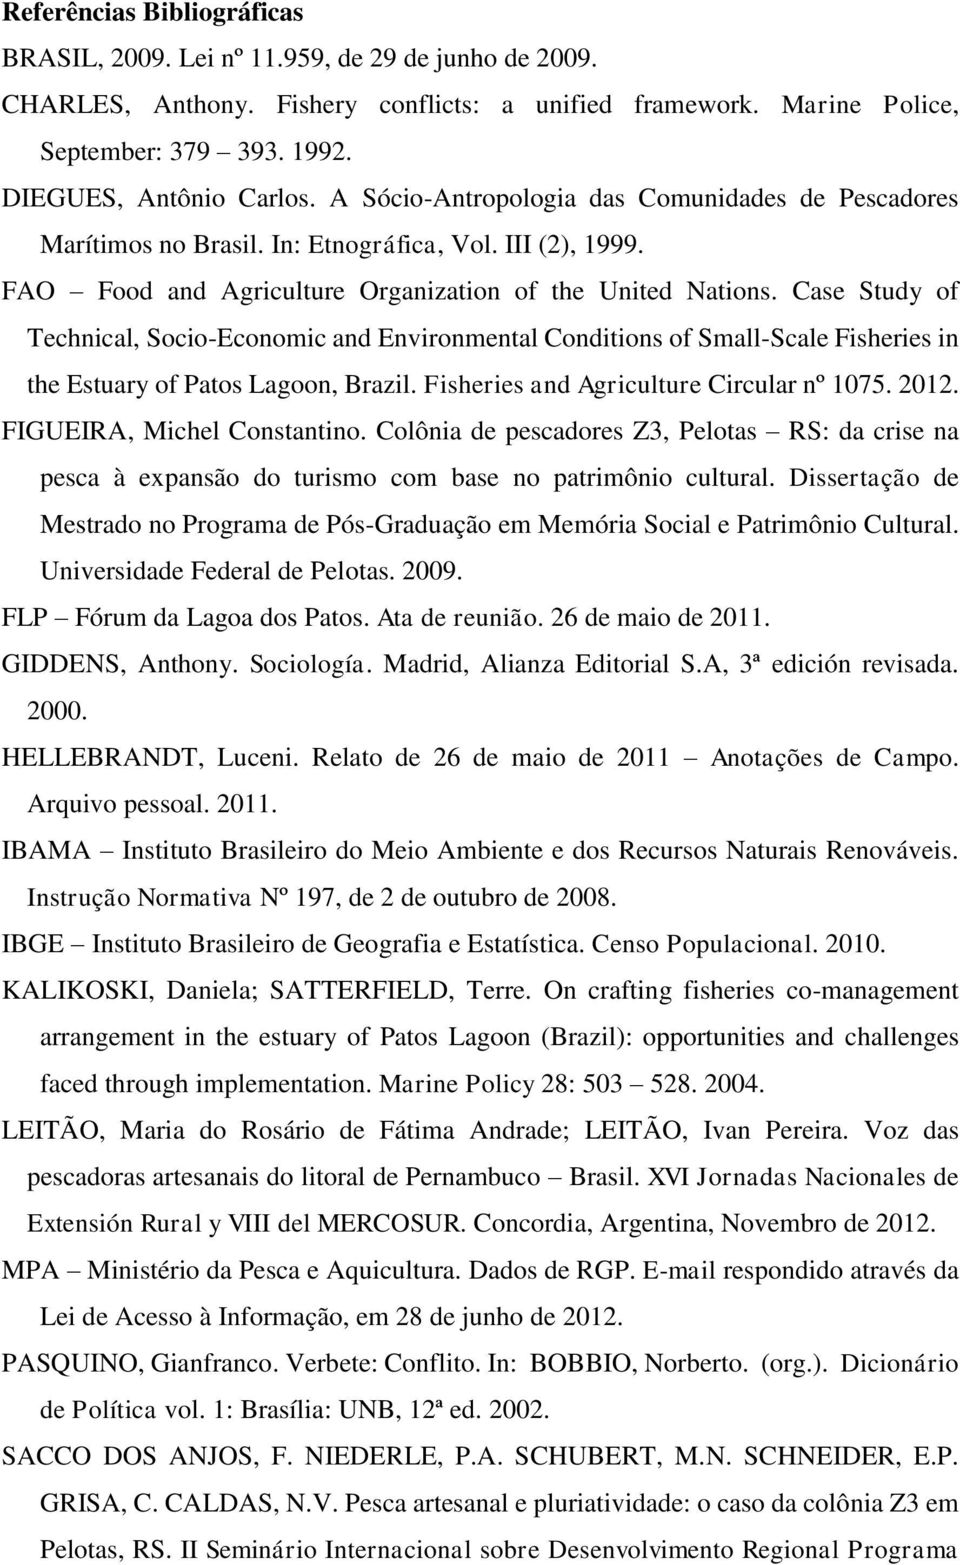 Case Study of Technical, Socio-Economic and Environmental Conditions of Small-Scale Fisheries in the Estuary of Patos Lagoon, Brazil. Fisheries and Agriculture Circular nº 1075. 2012.